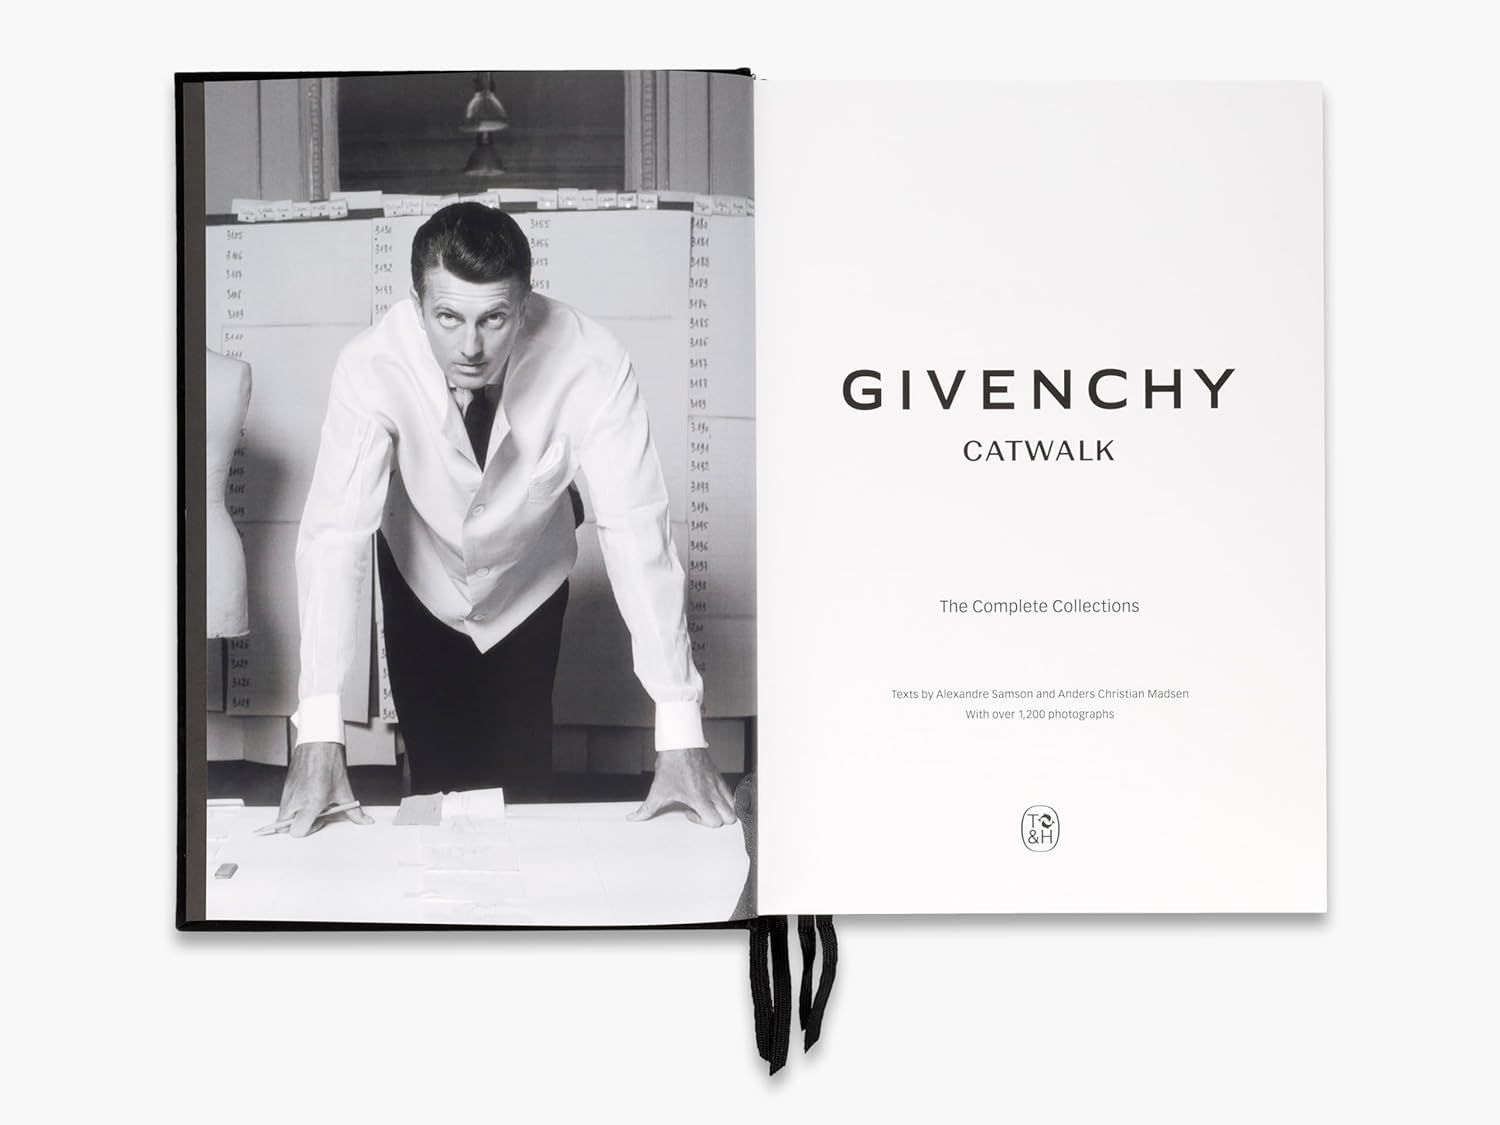  Givenchy Catwalk: The Complete Collections 